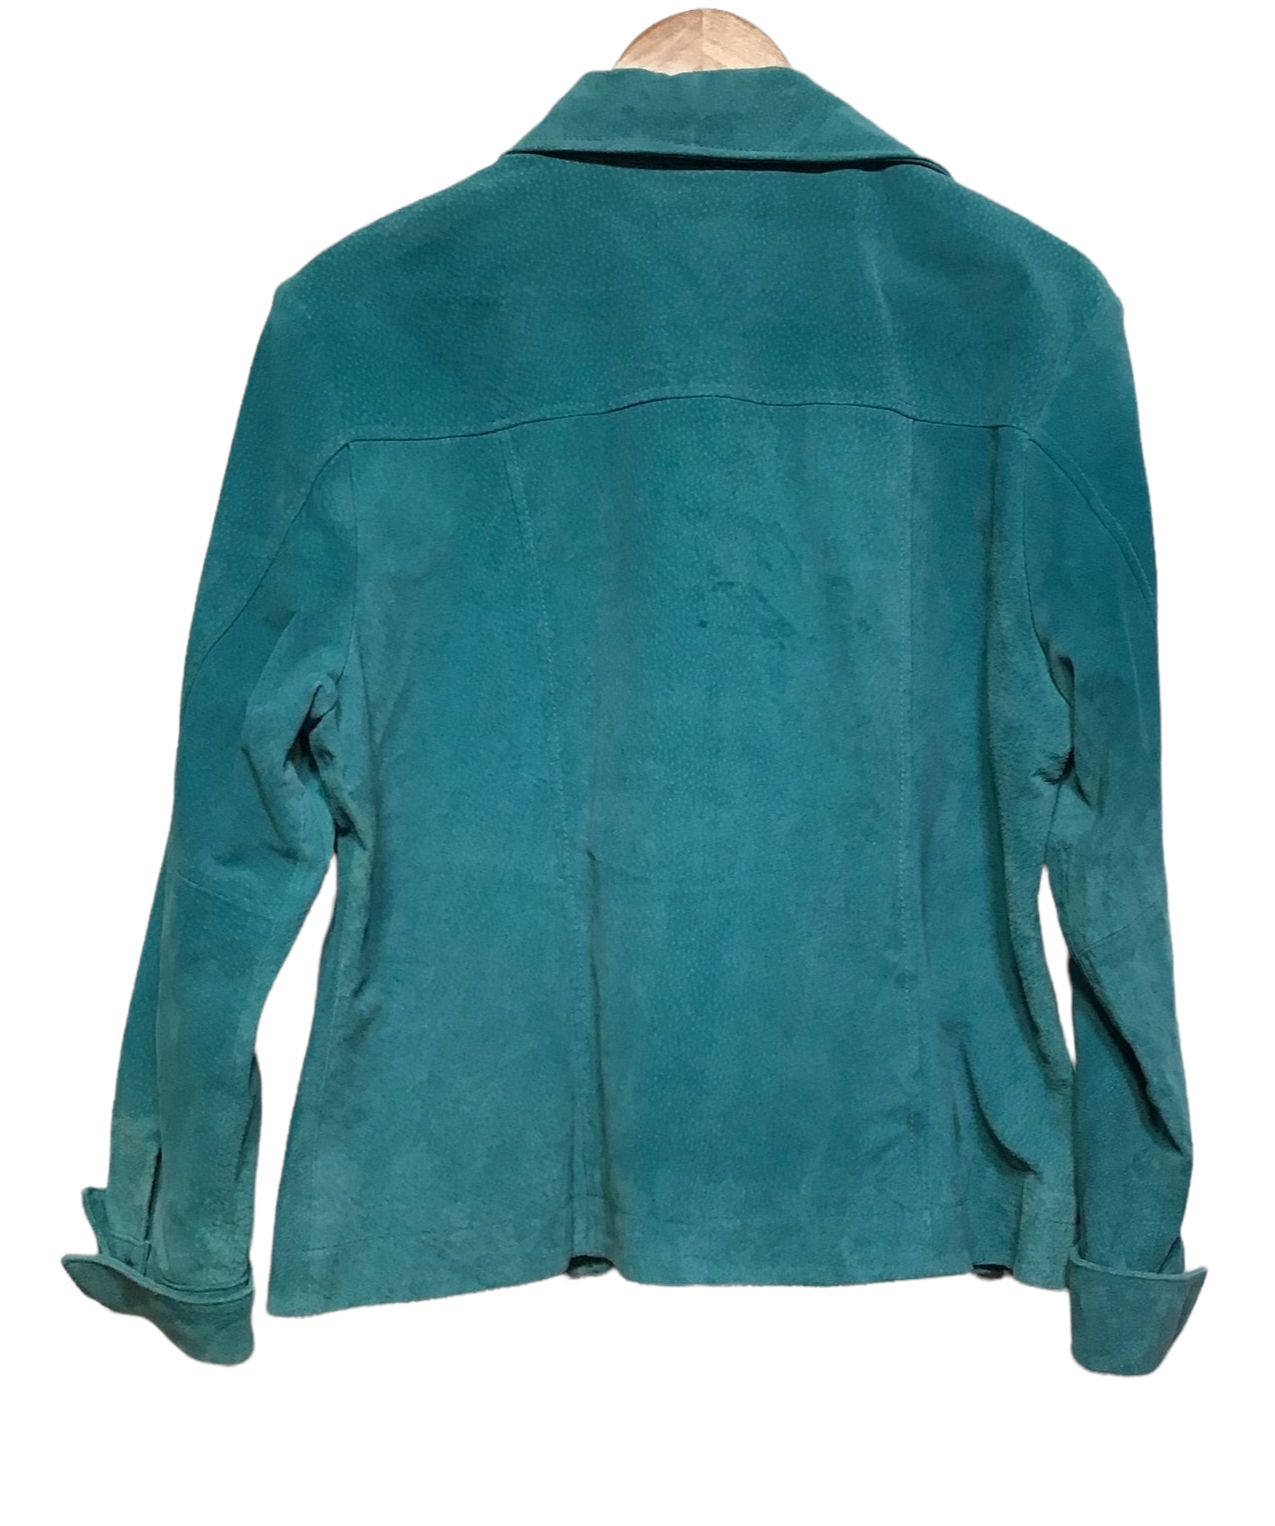 Christopher & Banks Turquoise Suede Jacket (Women’s Size XL)